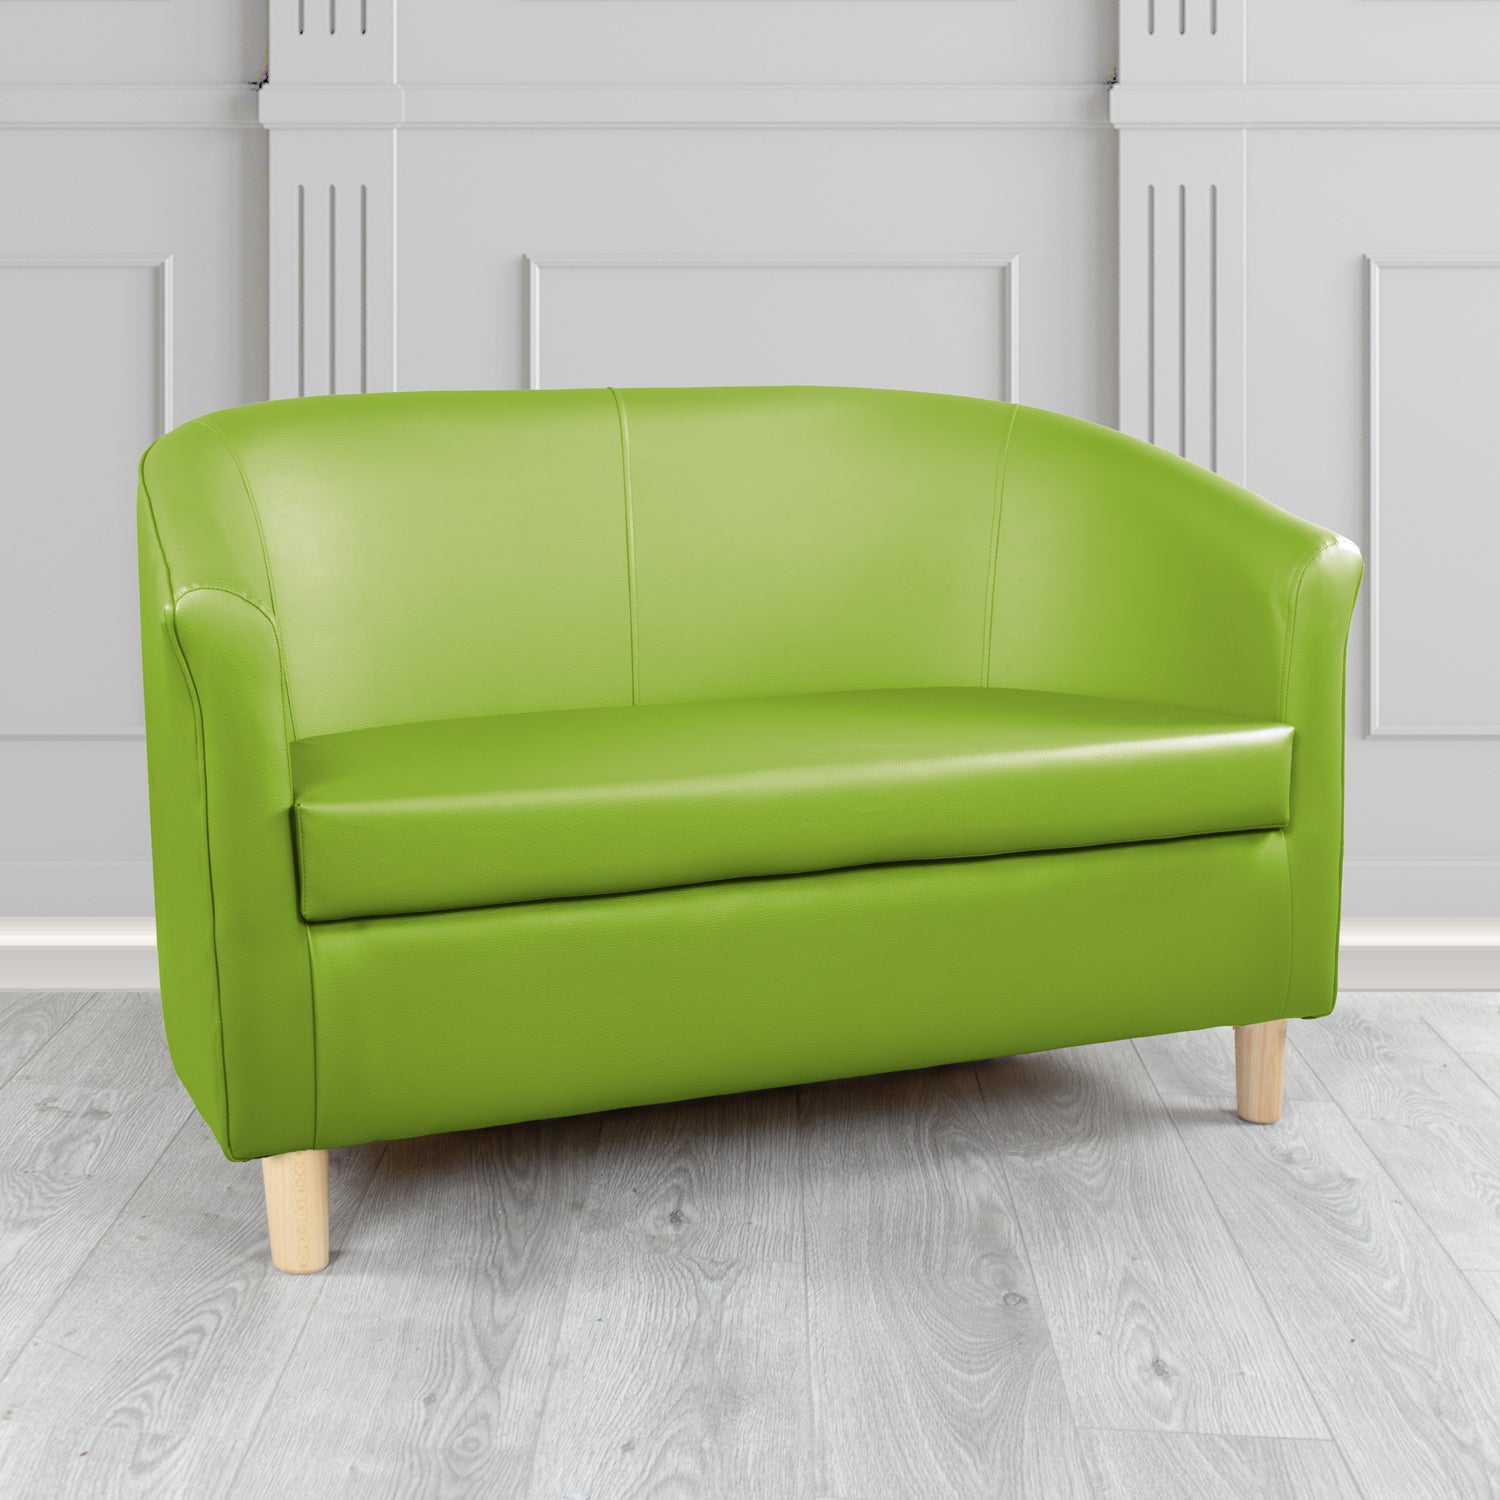 Tuscany Just Colour Citrus Green Crib 5 Faux Leather 2 Seater Tub Sofa - The Tub Chair Shop